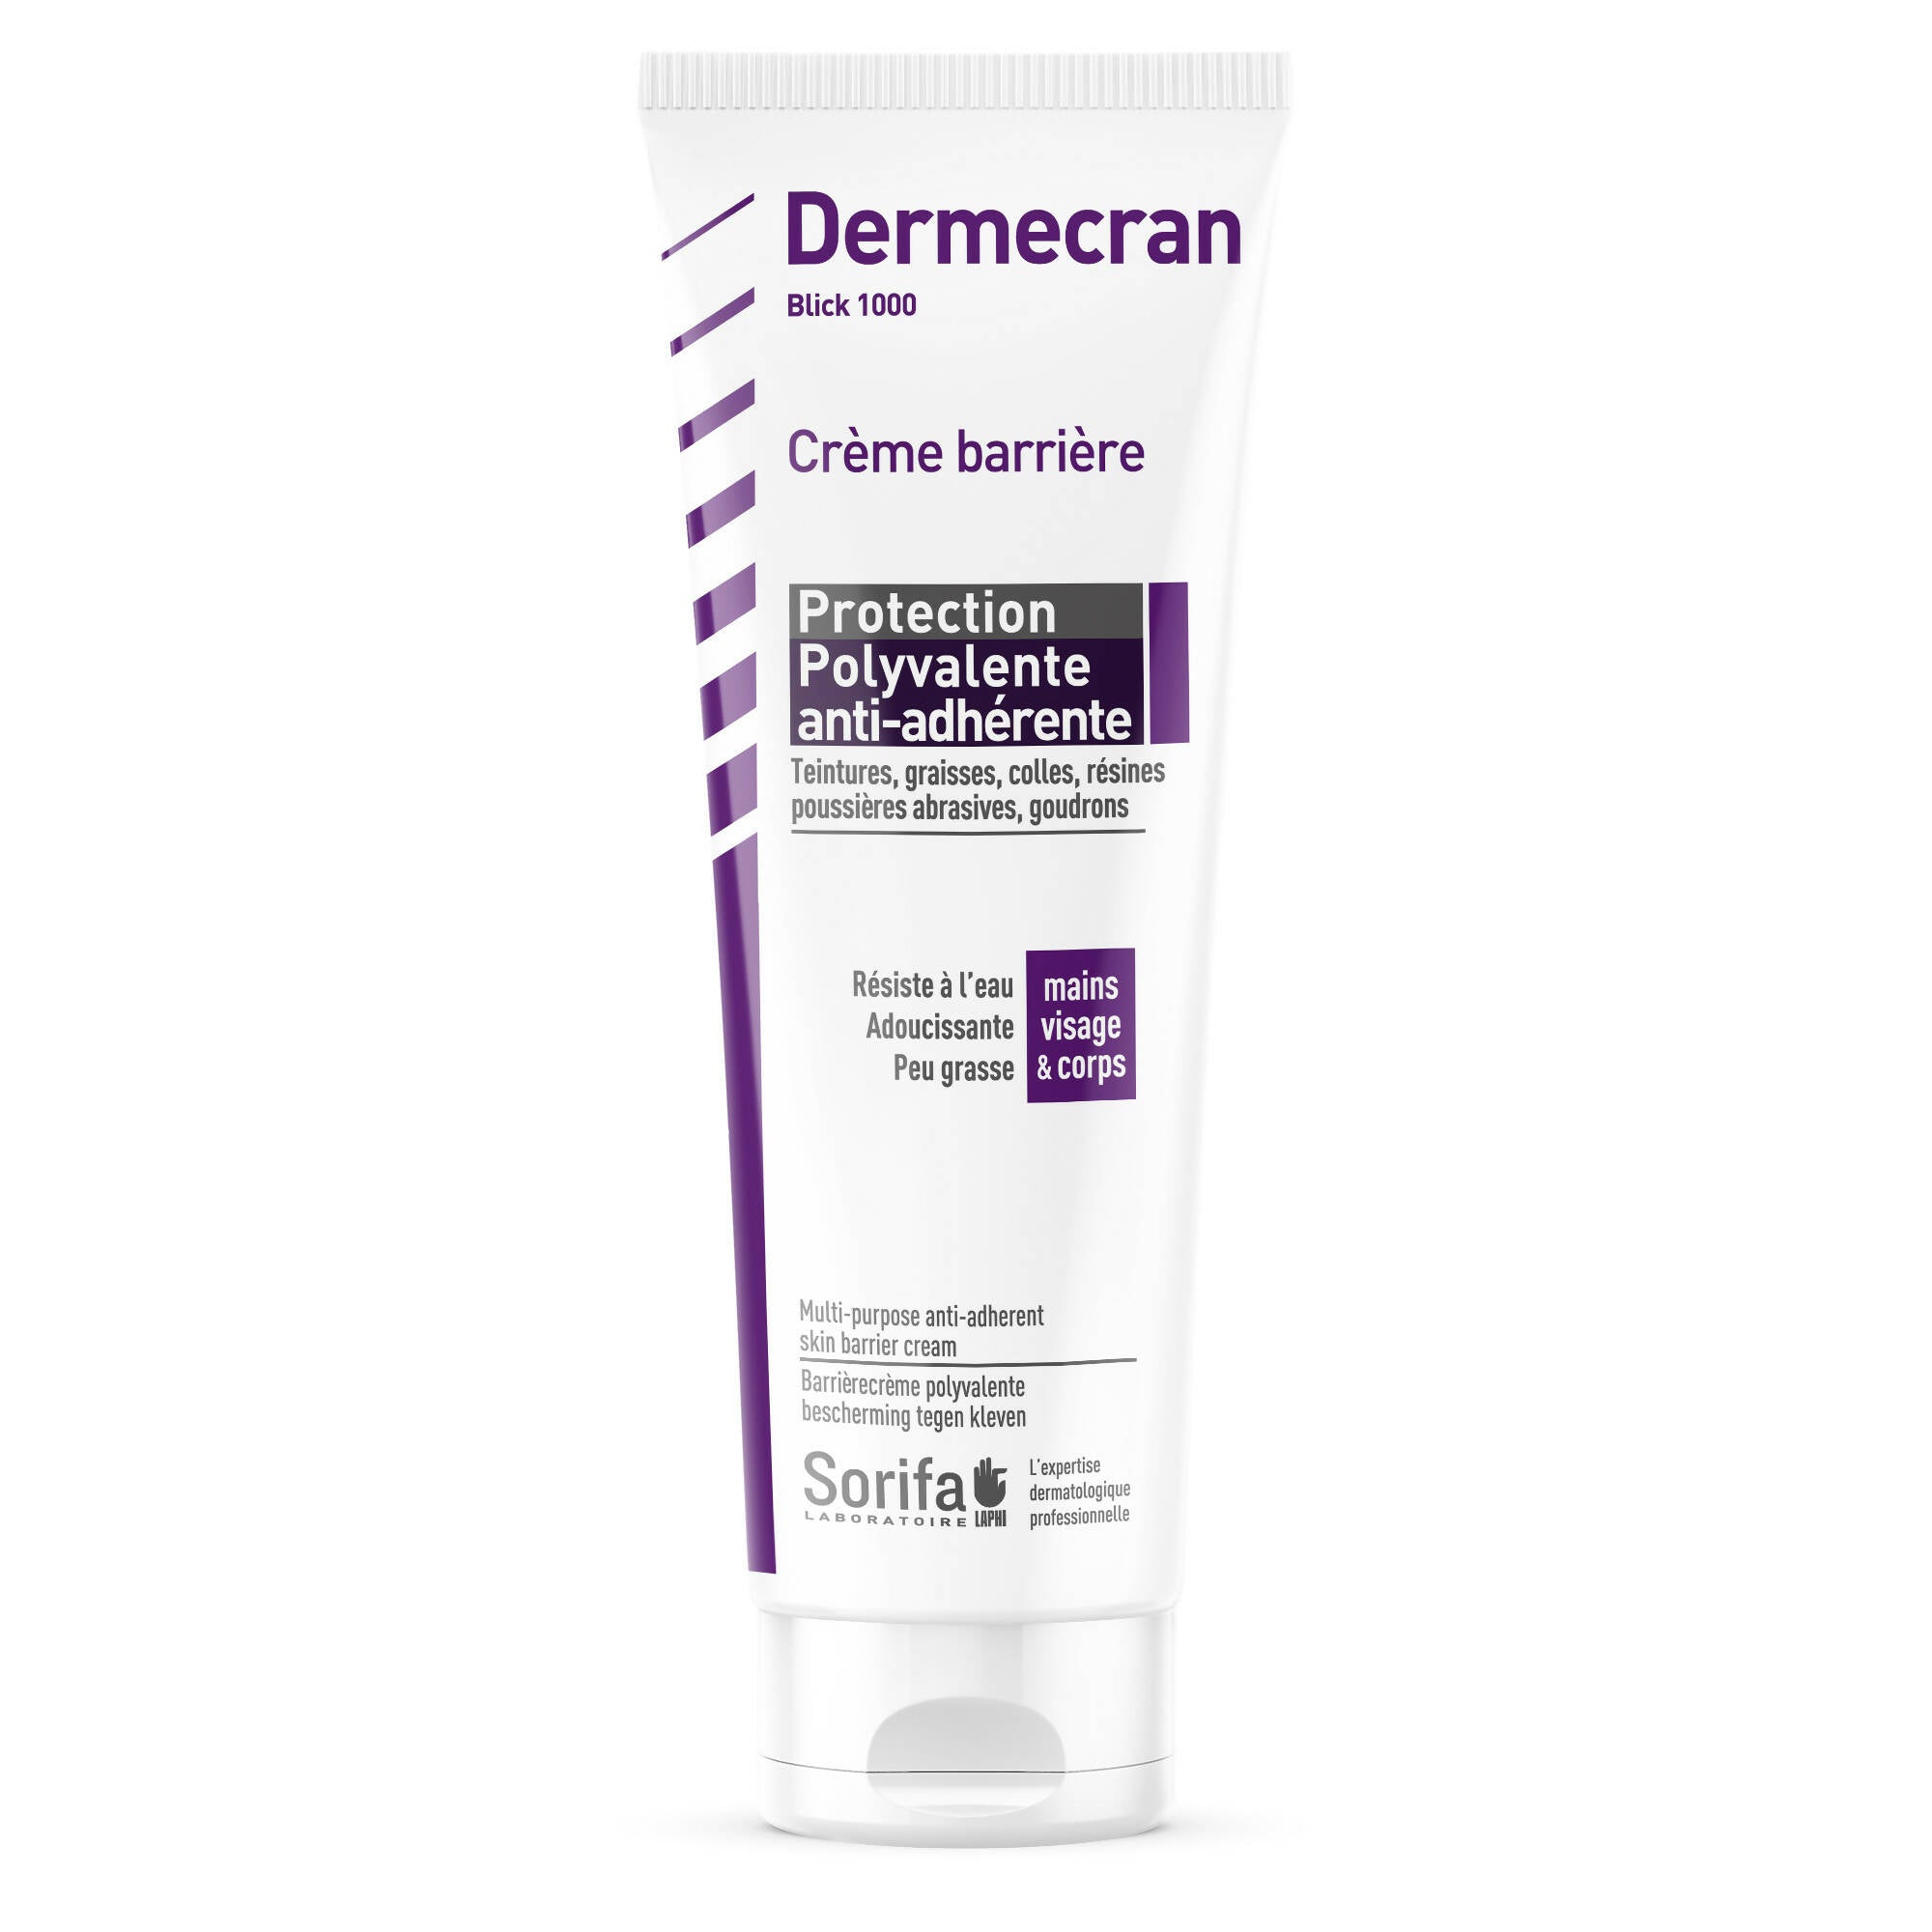 SORIFA - Complete box of 24 - Dermscreen - Barrier Cream - Multipurpose ANTI-ADHERENT protection / Blick 1000 - Hands, face and body - High tolerance - Fragrance-free - 125 ml tube. - 0